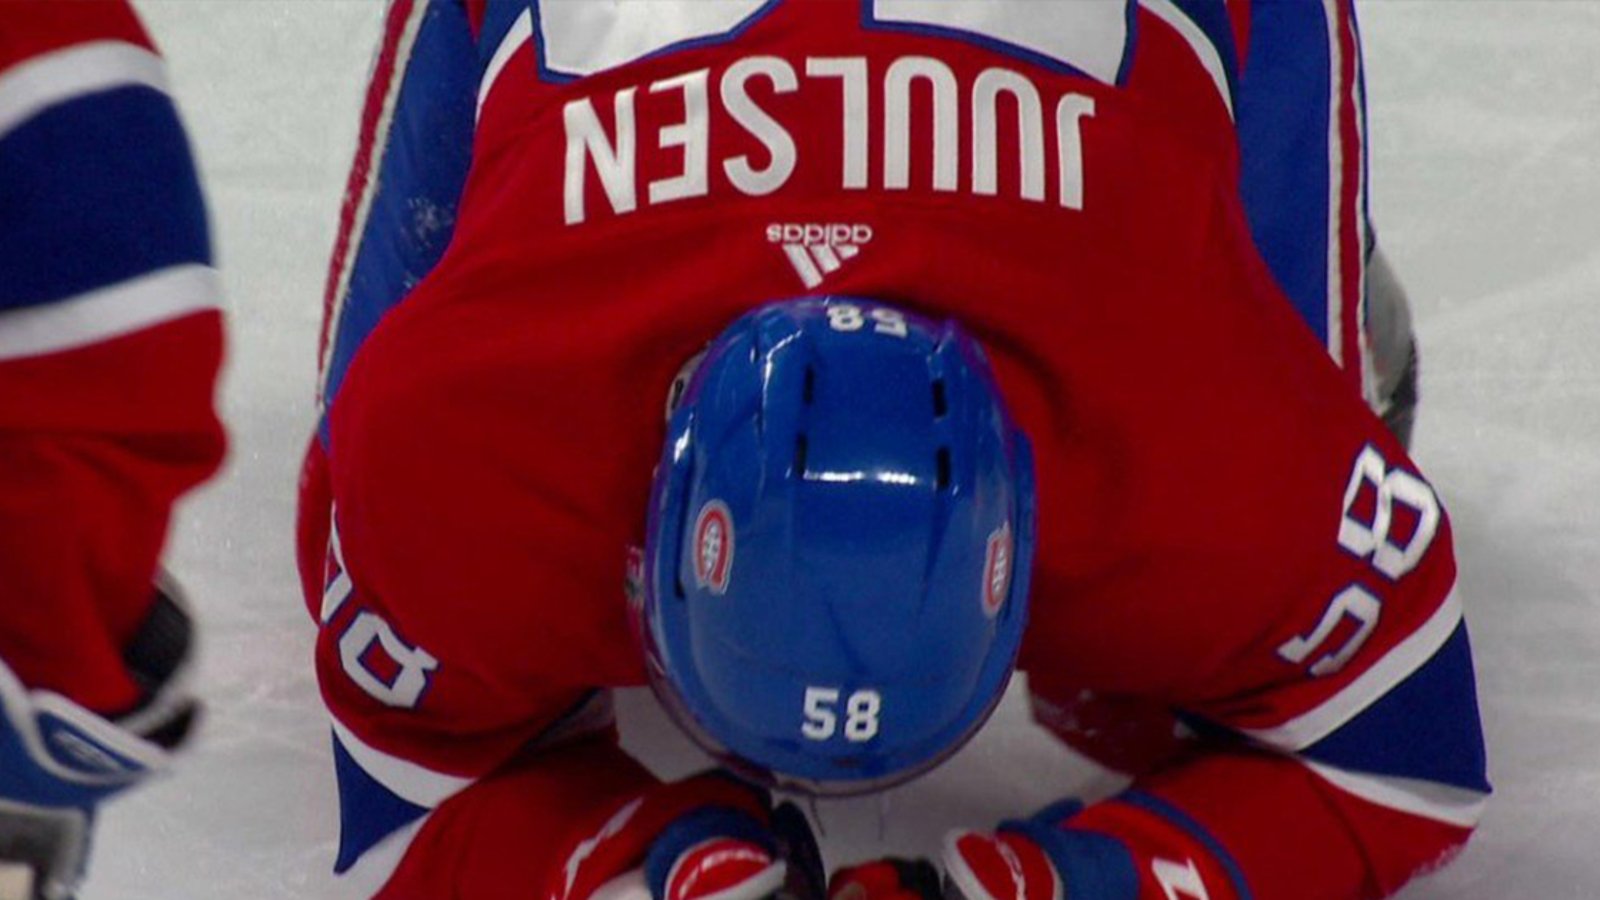 Breaking: Habs rookie Juulsen out indefinitely after taking two pucks to the face